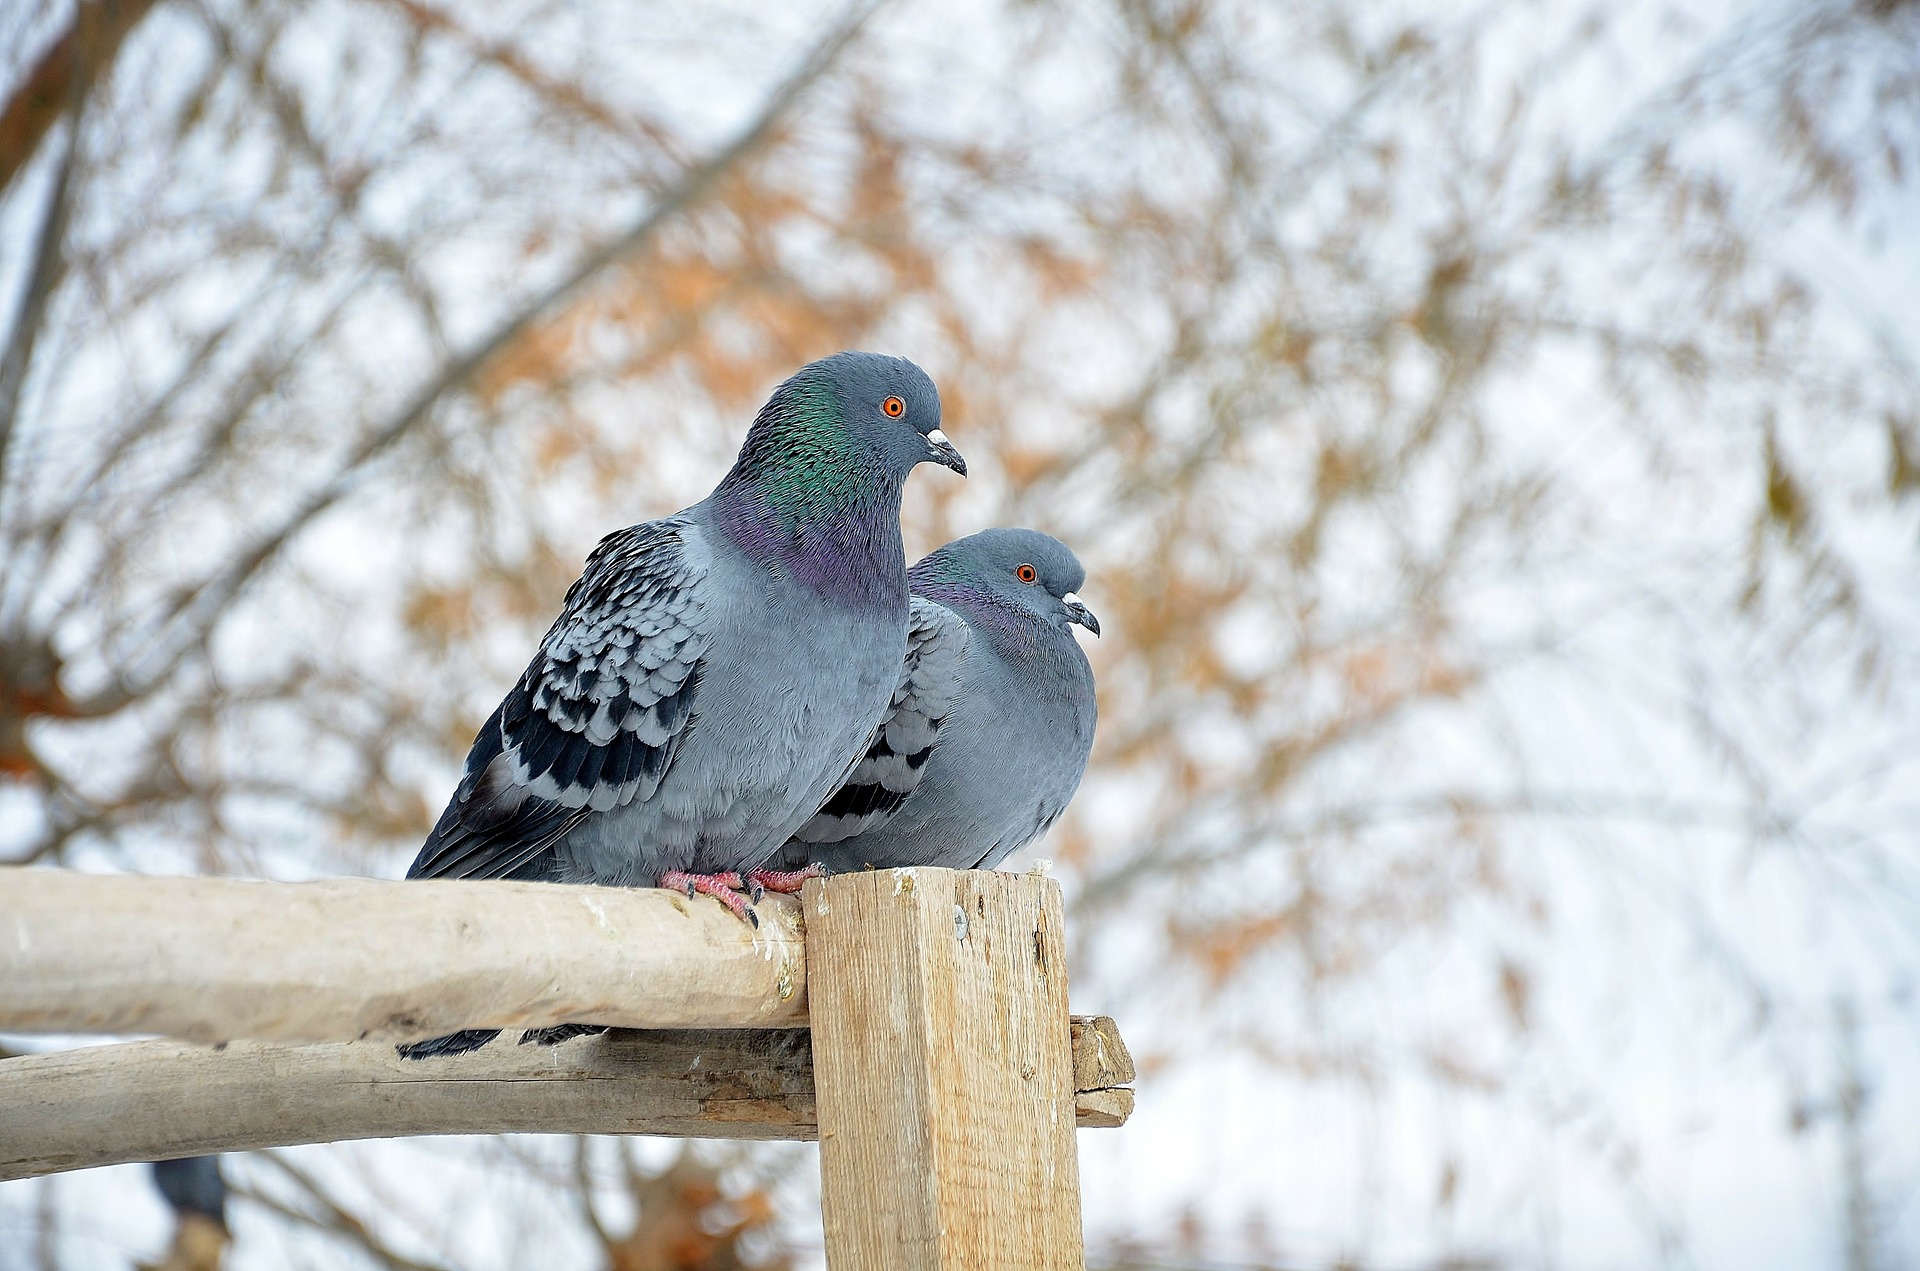 How to Get Rid of Pigeons? 3 Best Pigeon Repellents